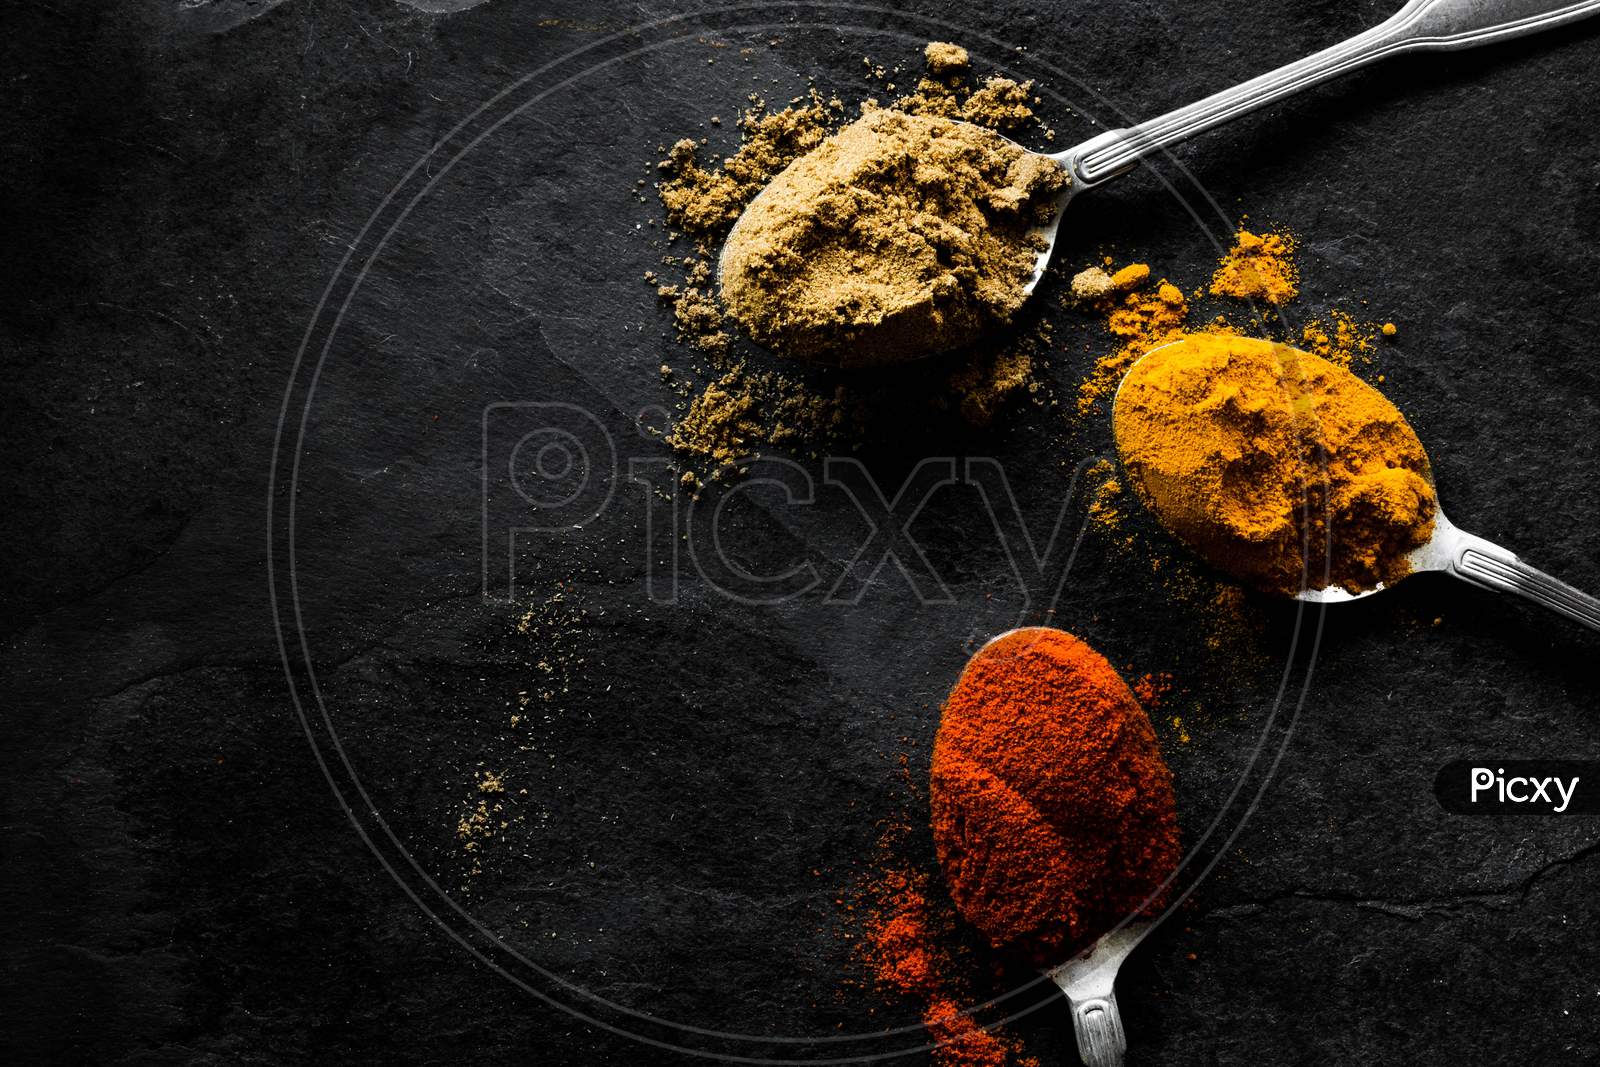 graphic design, photography, space, leaf, spices, red chili